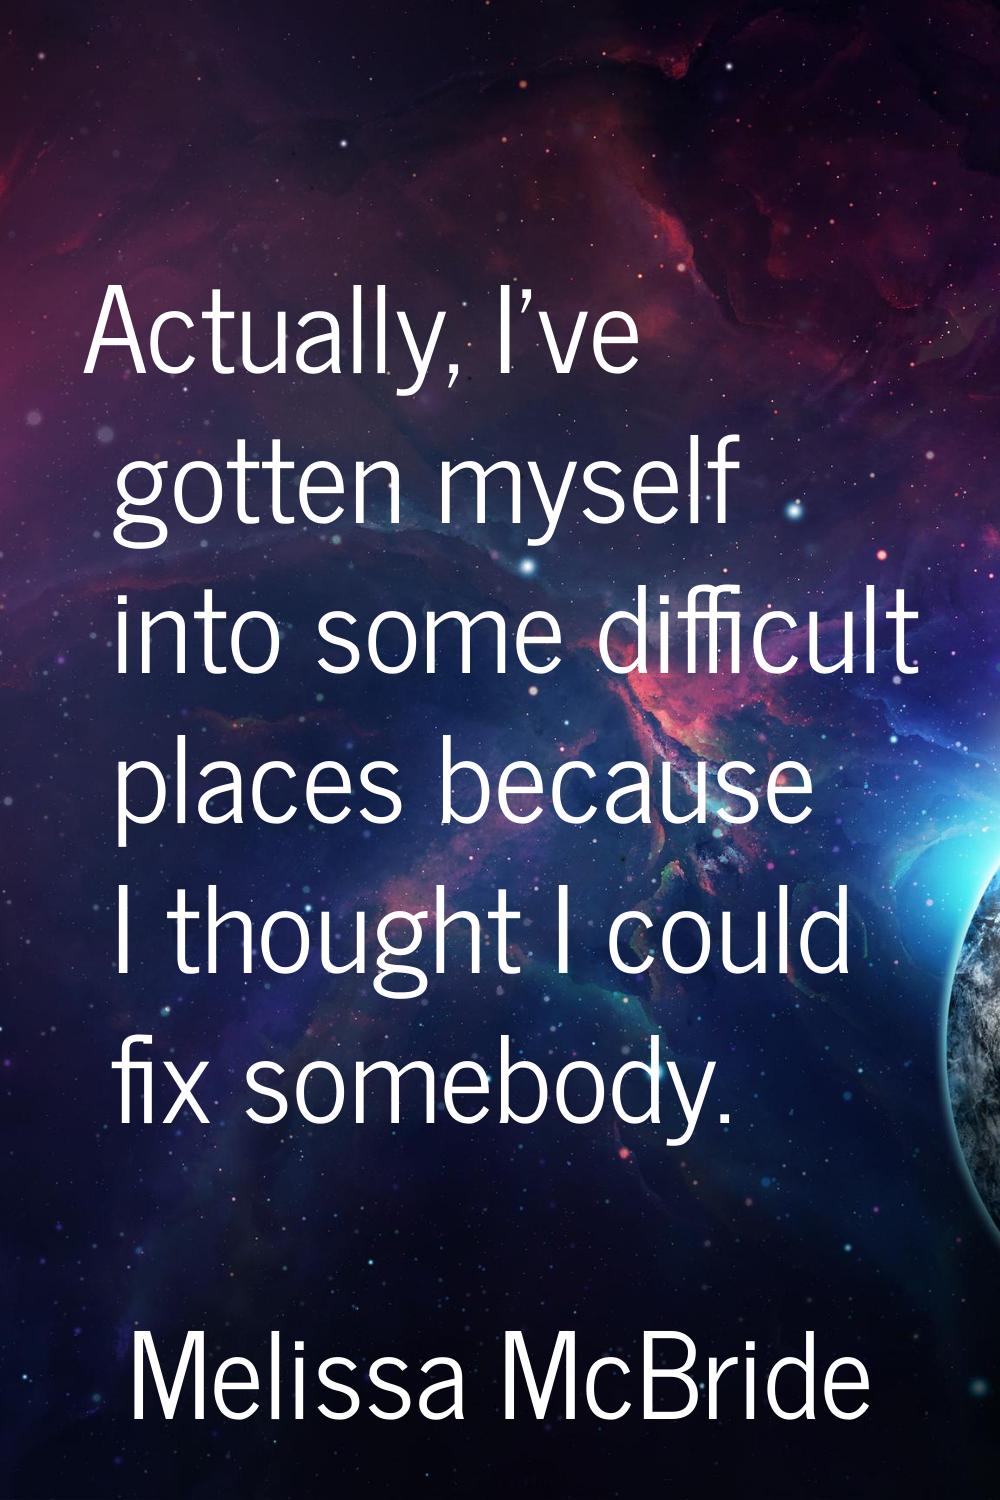 Actually, I've gotten myself into some difficult places because I thought I could fix somebody.